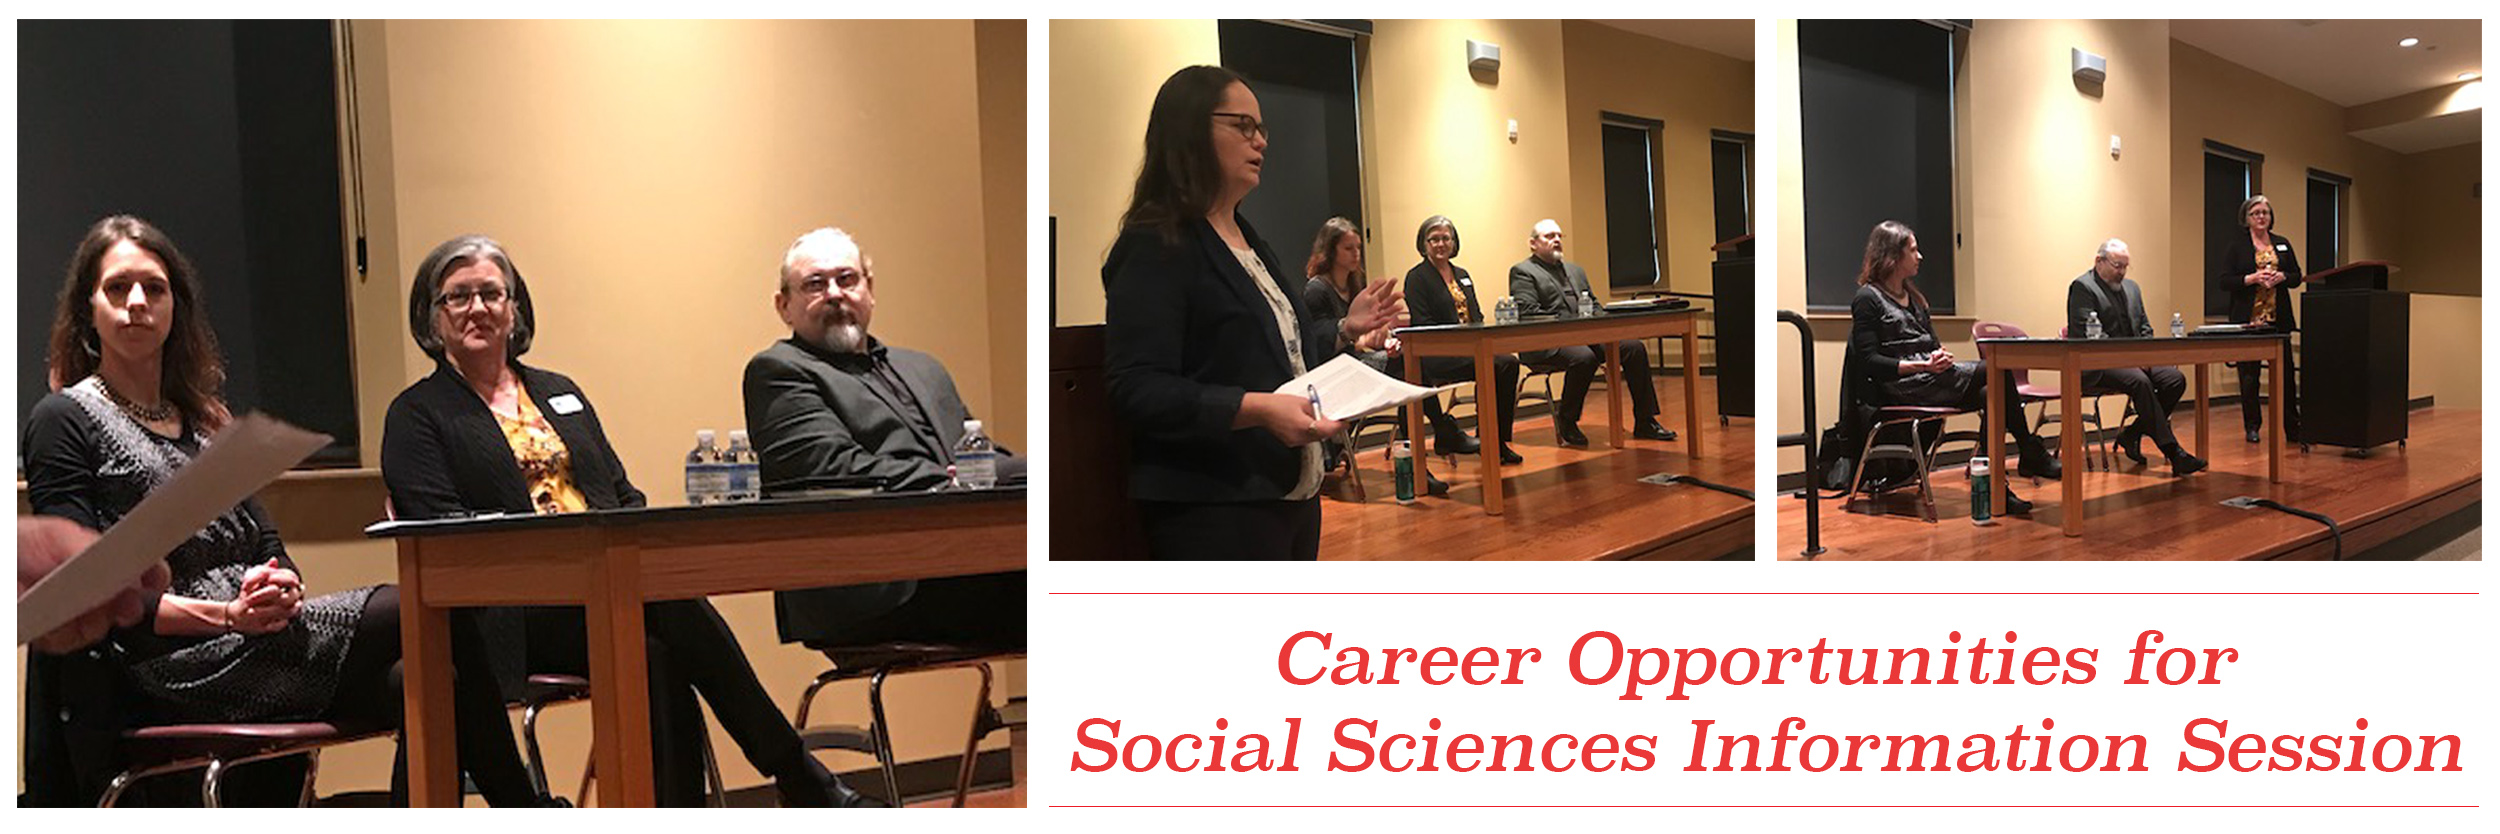 Sociology, Anthropology, And Criminal Justice Event, Career Opportunities for Social Sciences Information Session.